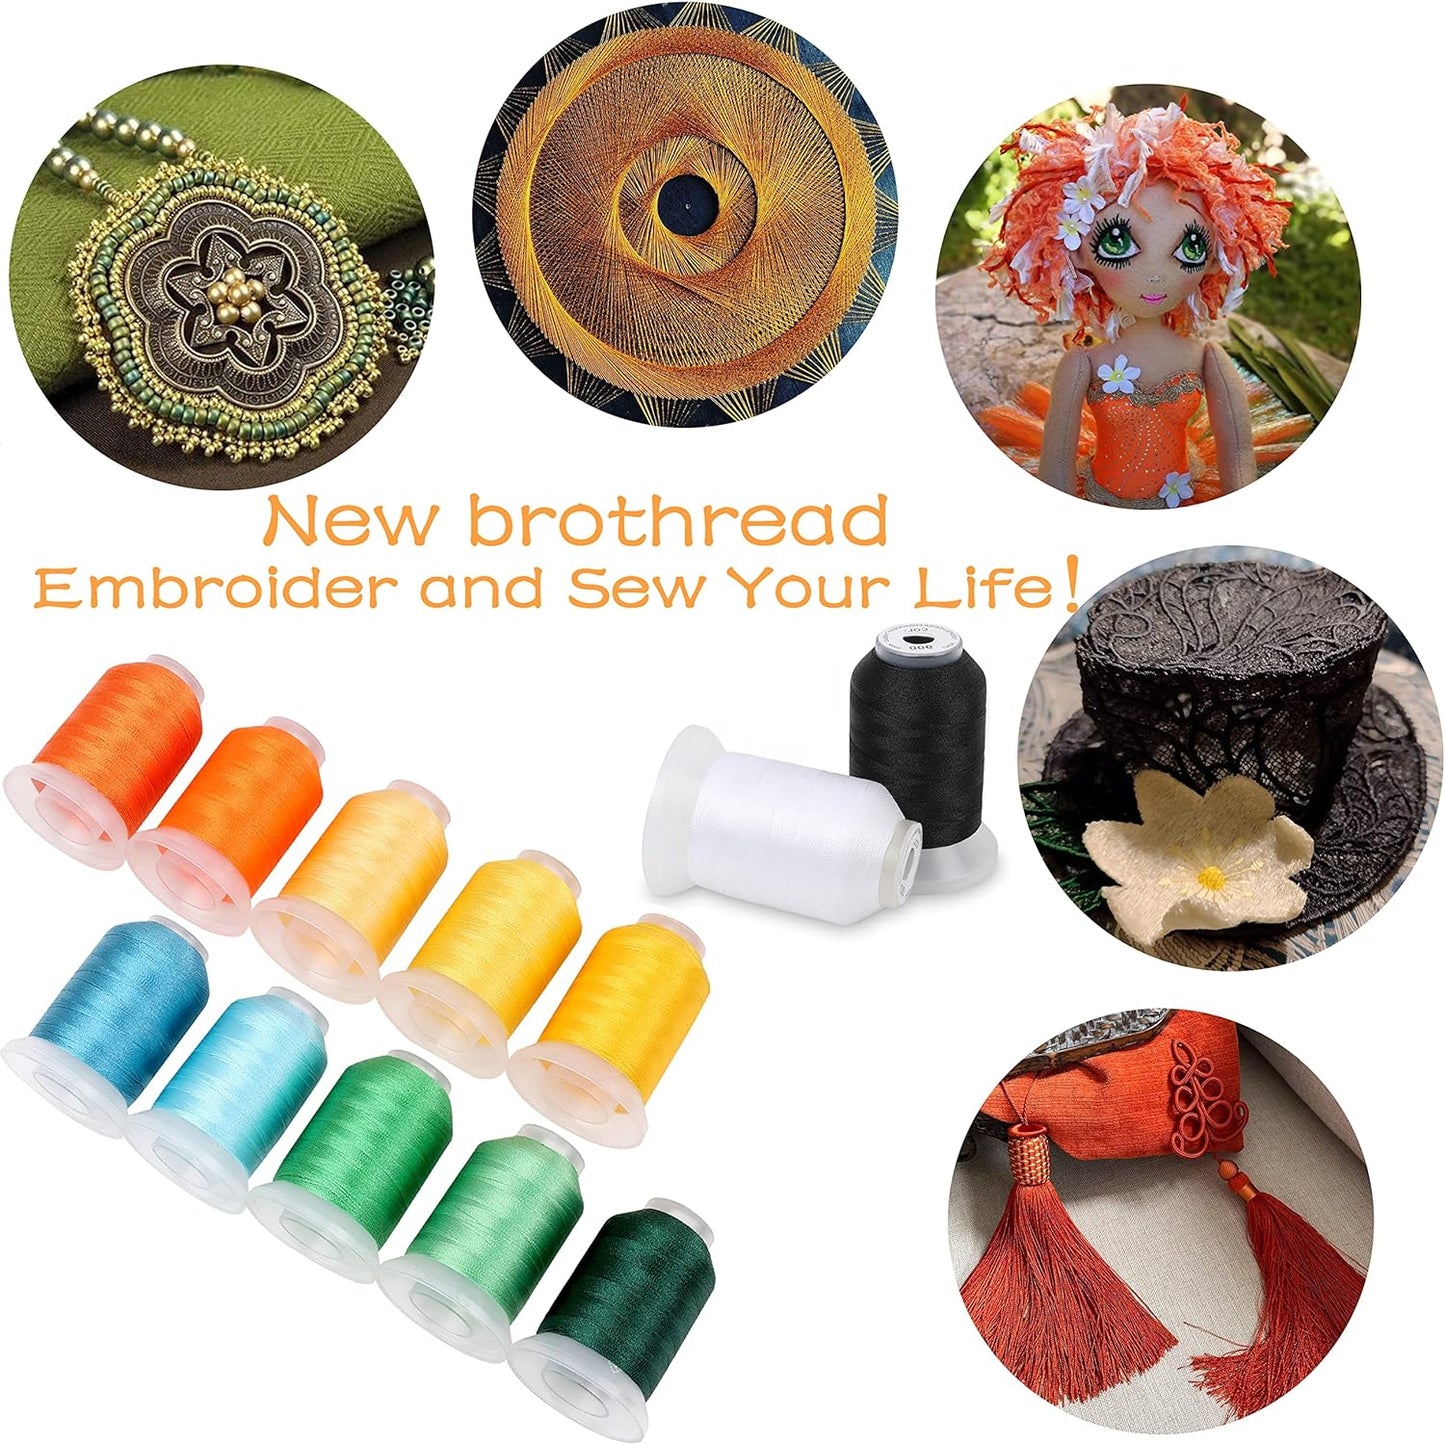 63 Brother Colors Polyester Machine Embroidery Thread Kit 500M